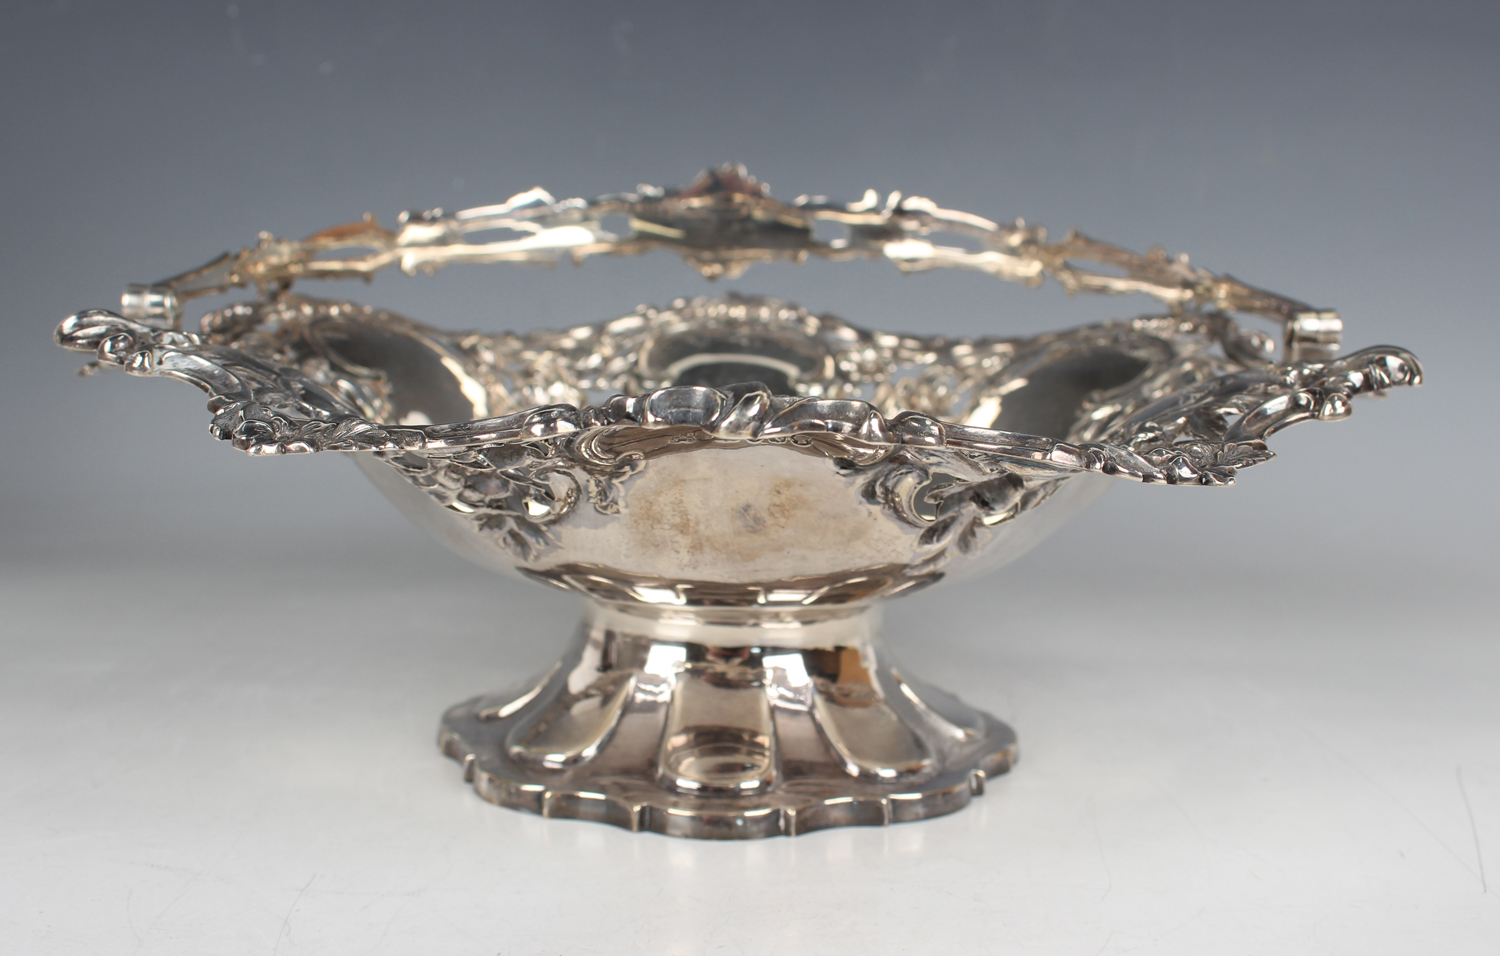 An early Victorian silver circular basket with pierced swing handle, the sides decorated in relief - Image 3 of 4